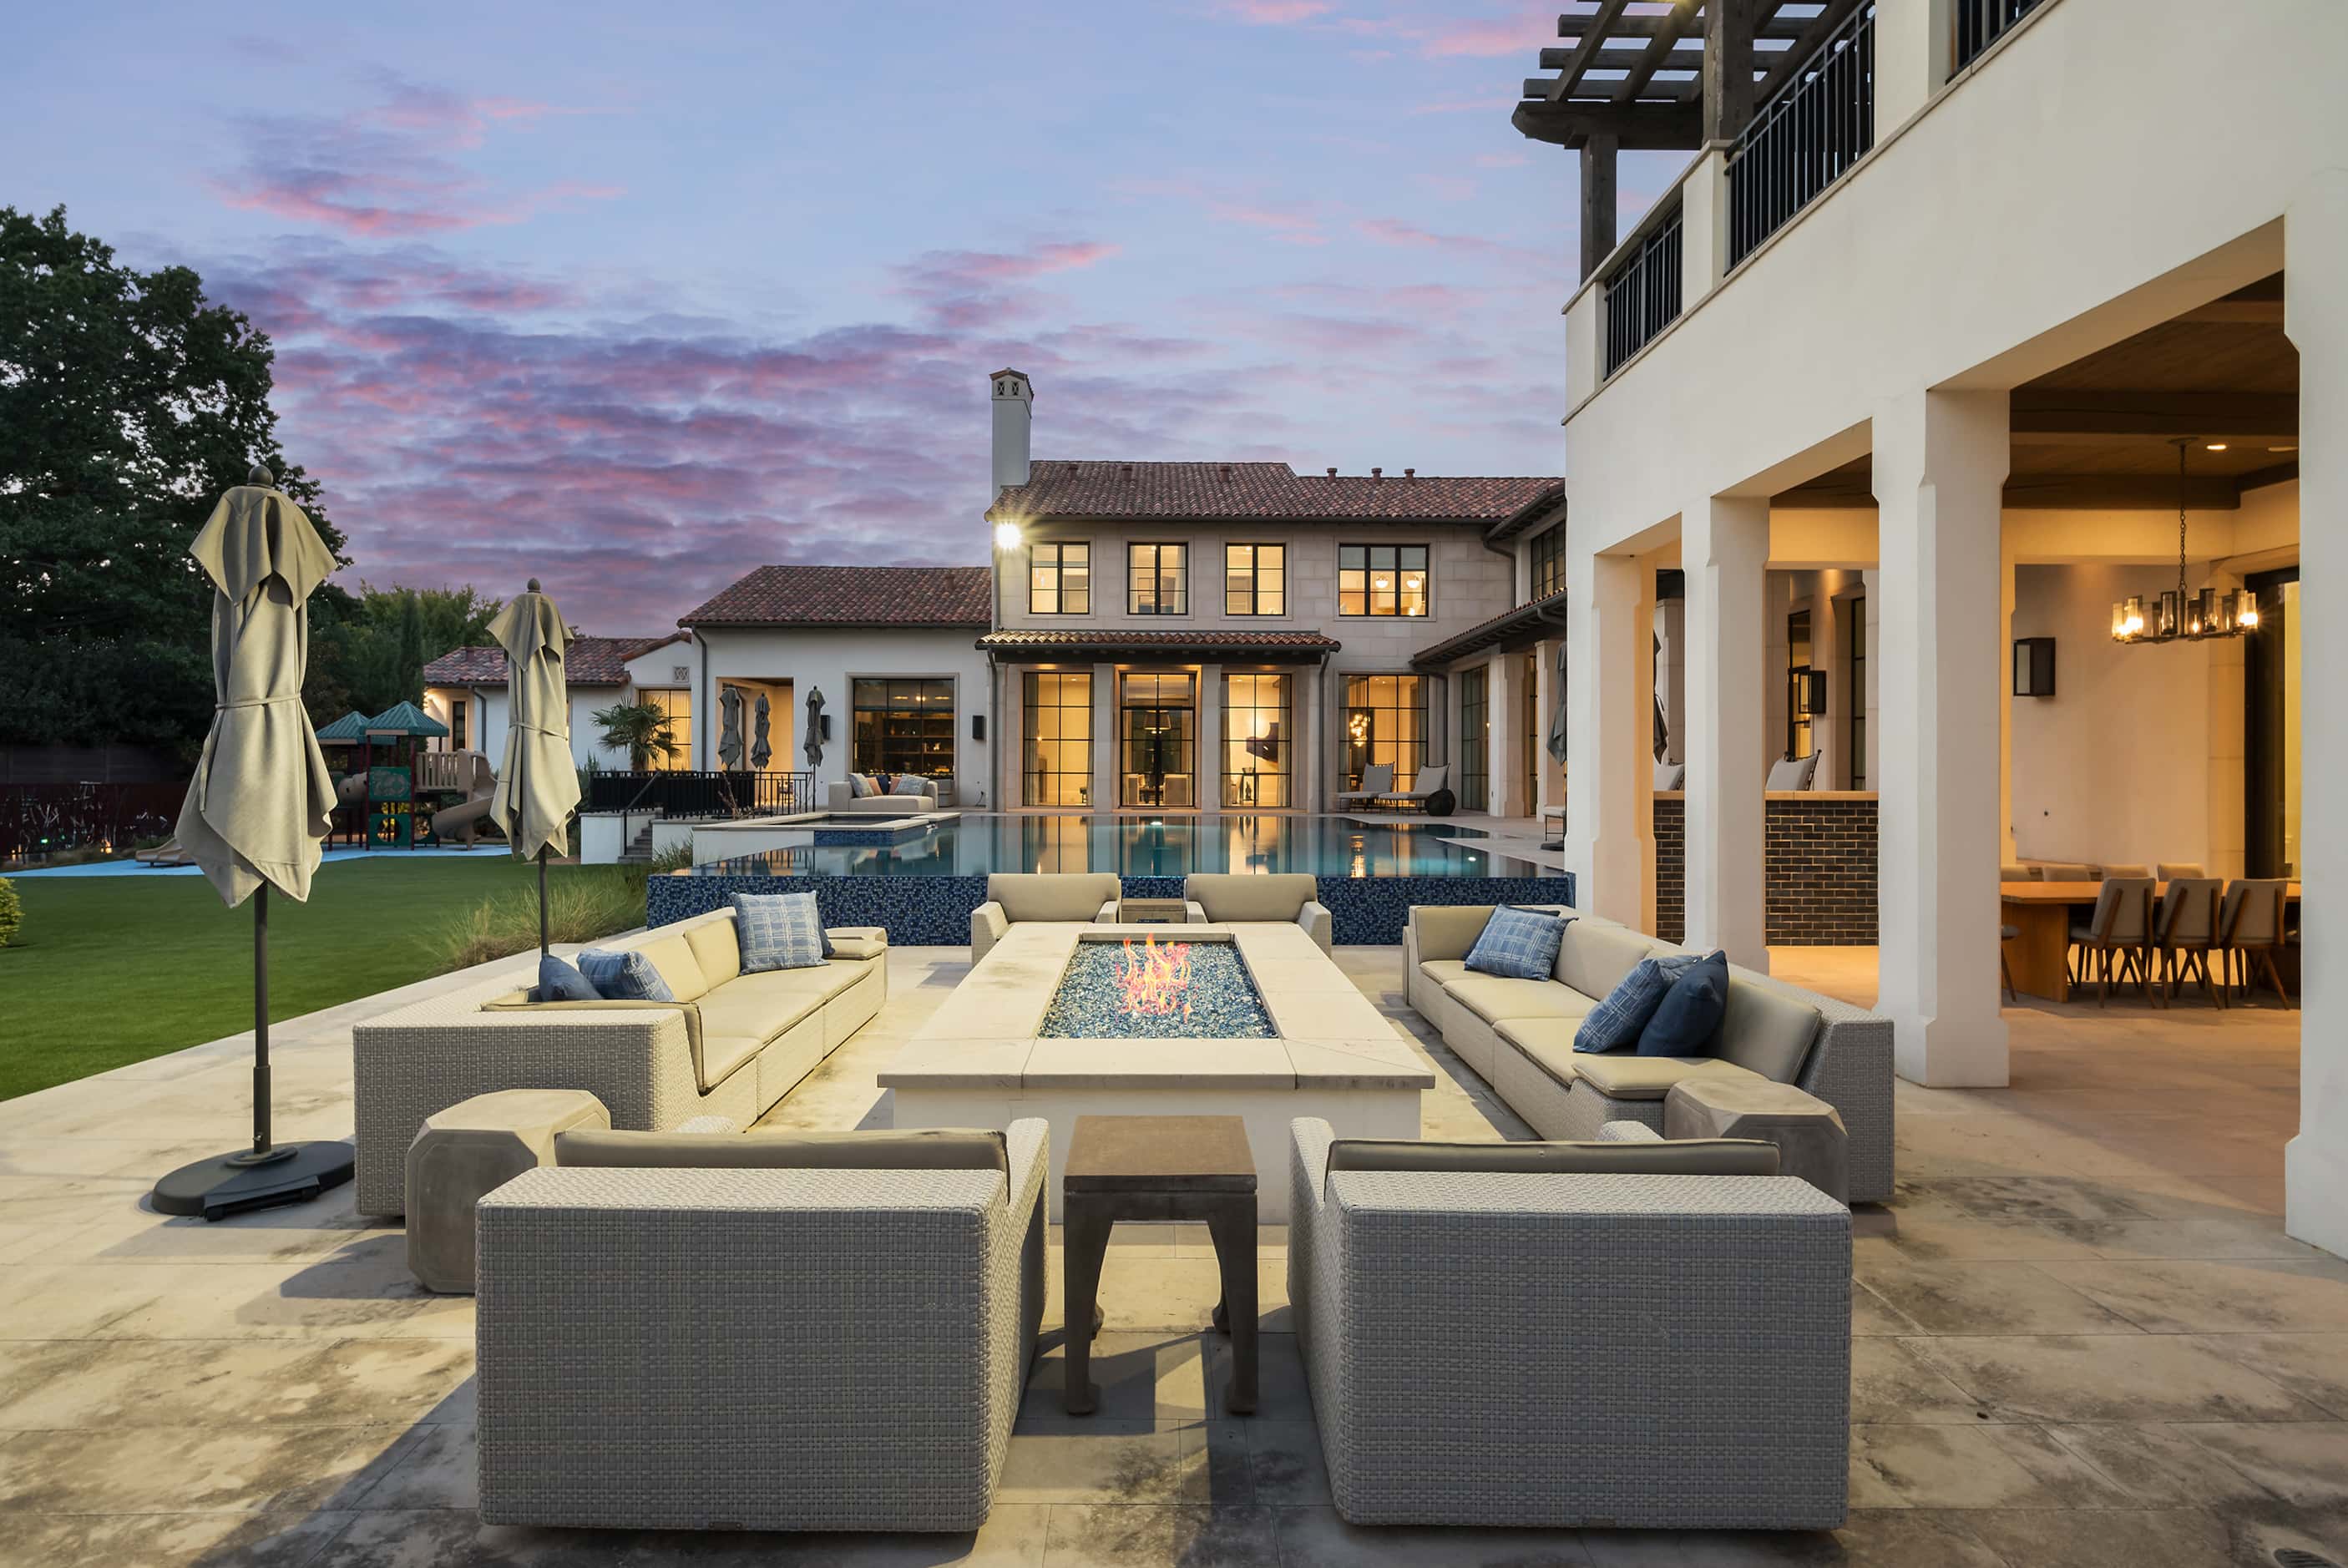 An evening scene in a backyard shows an outdoor seating area, a pool and the house in the...